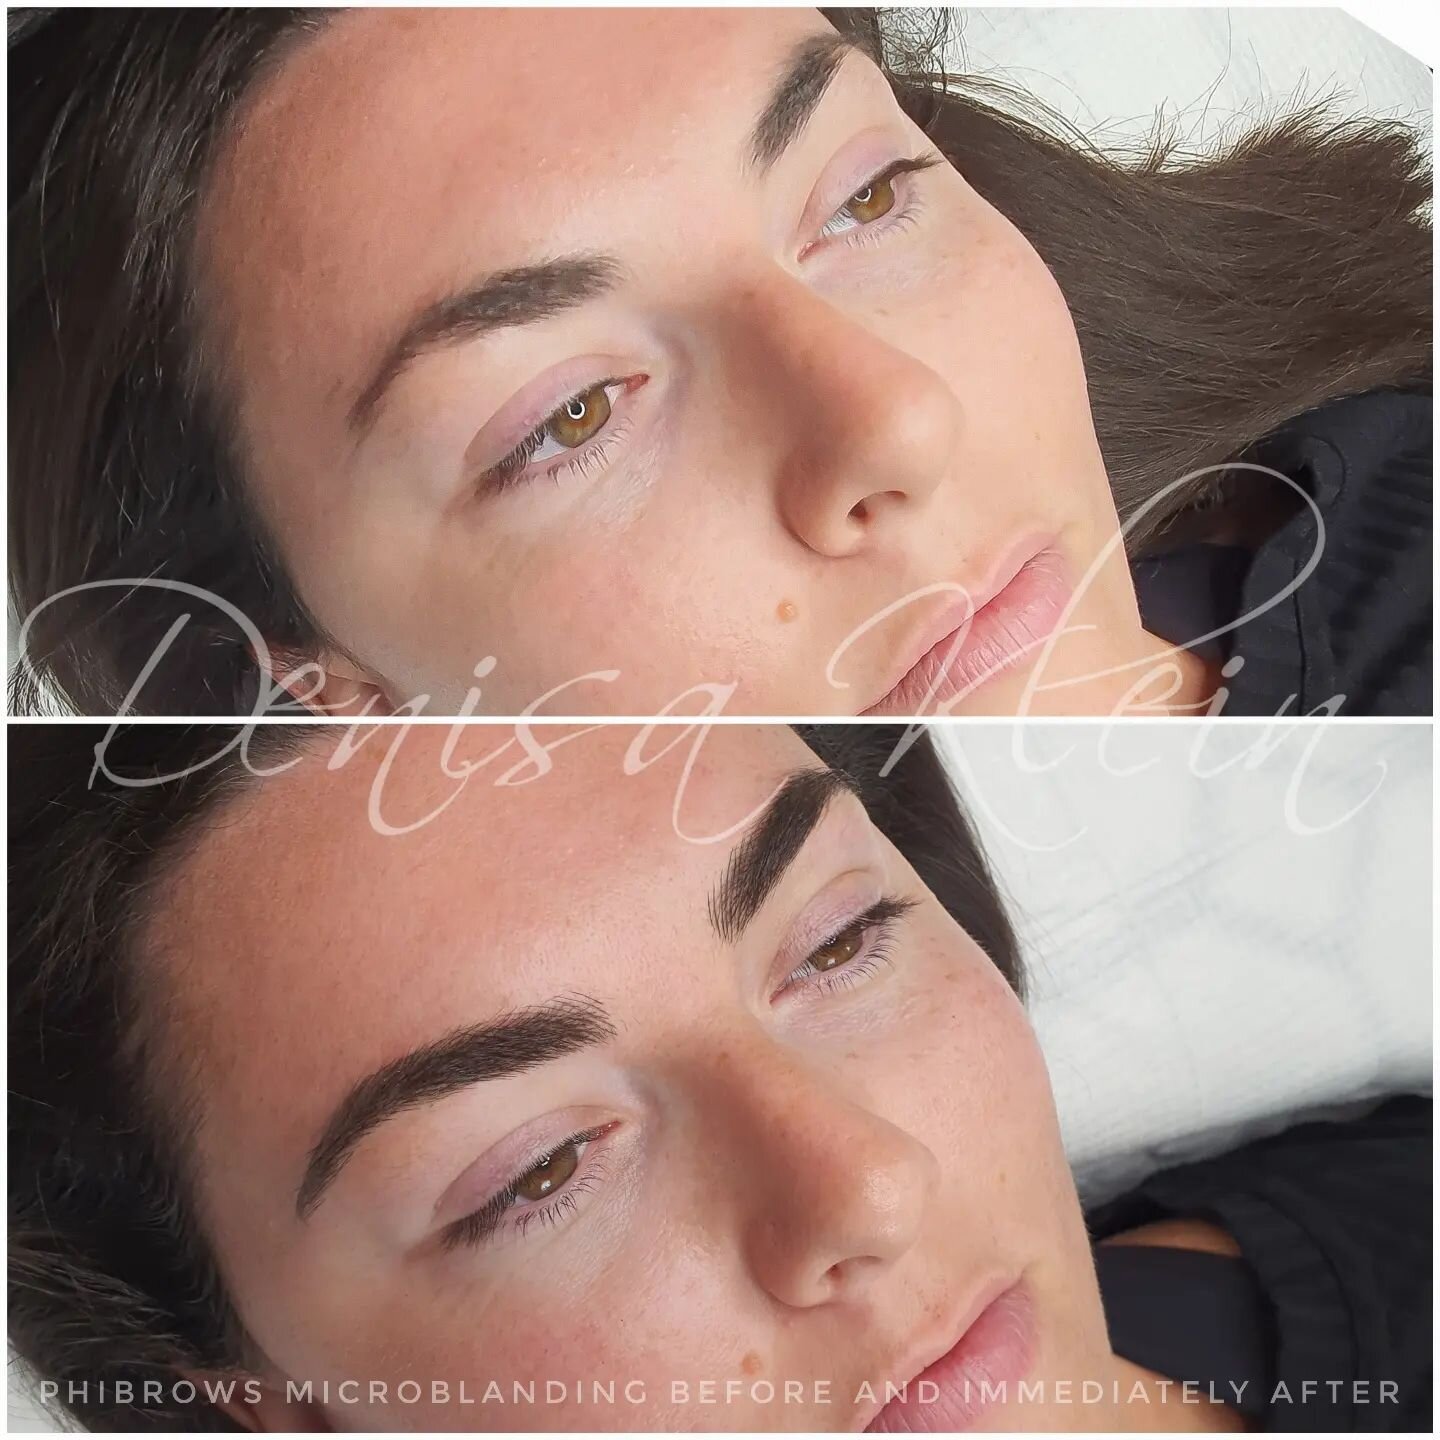 ❗PHIBROWS MICROBLADING❗- eyebrow transformation 😊

If you spend time filling in sparse or thin brows or if you regret over plucking in the past, then microblading may be a great choice. 
This method is perfect for those who want fully reconstruct, d